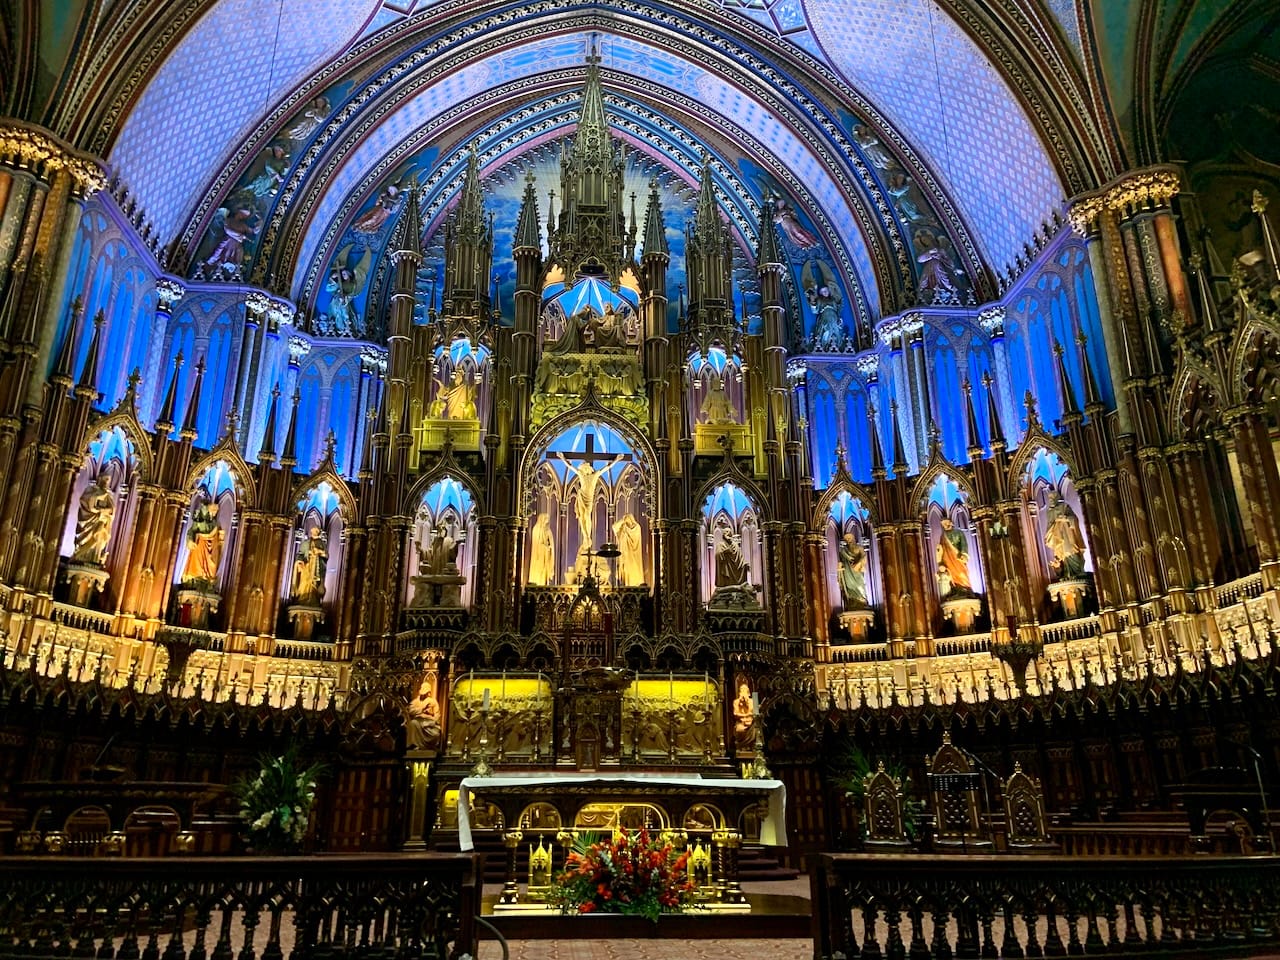 interior of the Notre-Dame Basilica of Montreal featuring sculptures of Jesus Christ and various saints under an intricate dome